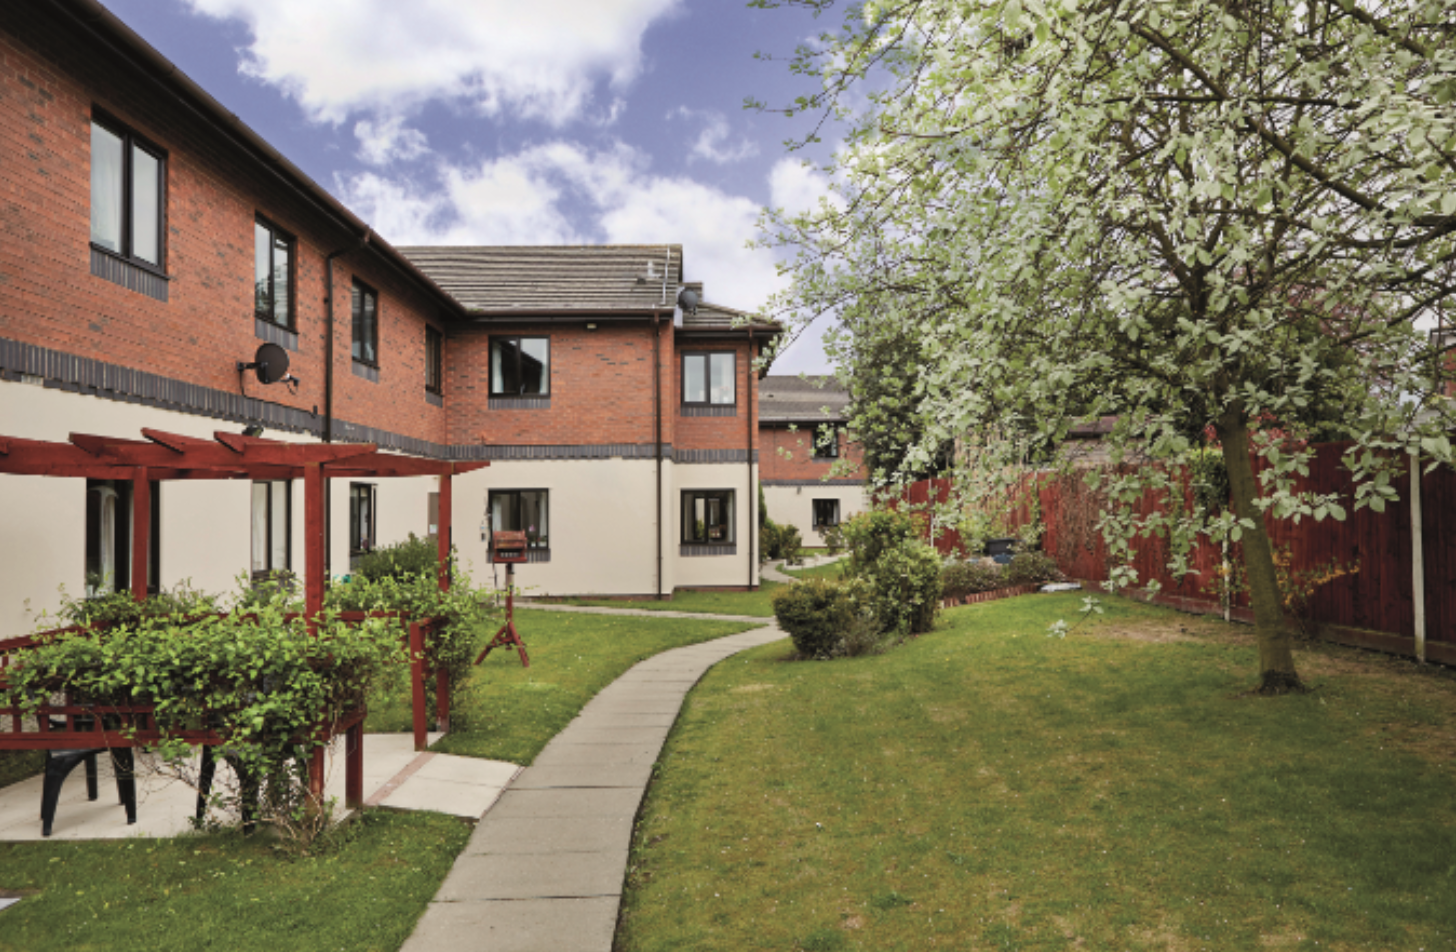 Exterior of Newton Court care home in Middlewich, Cheshire